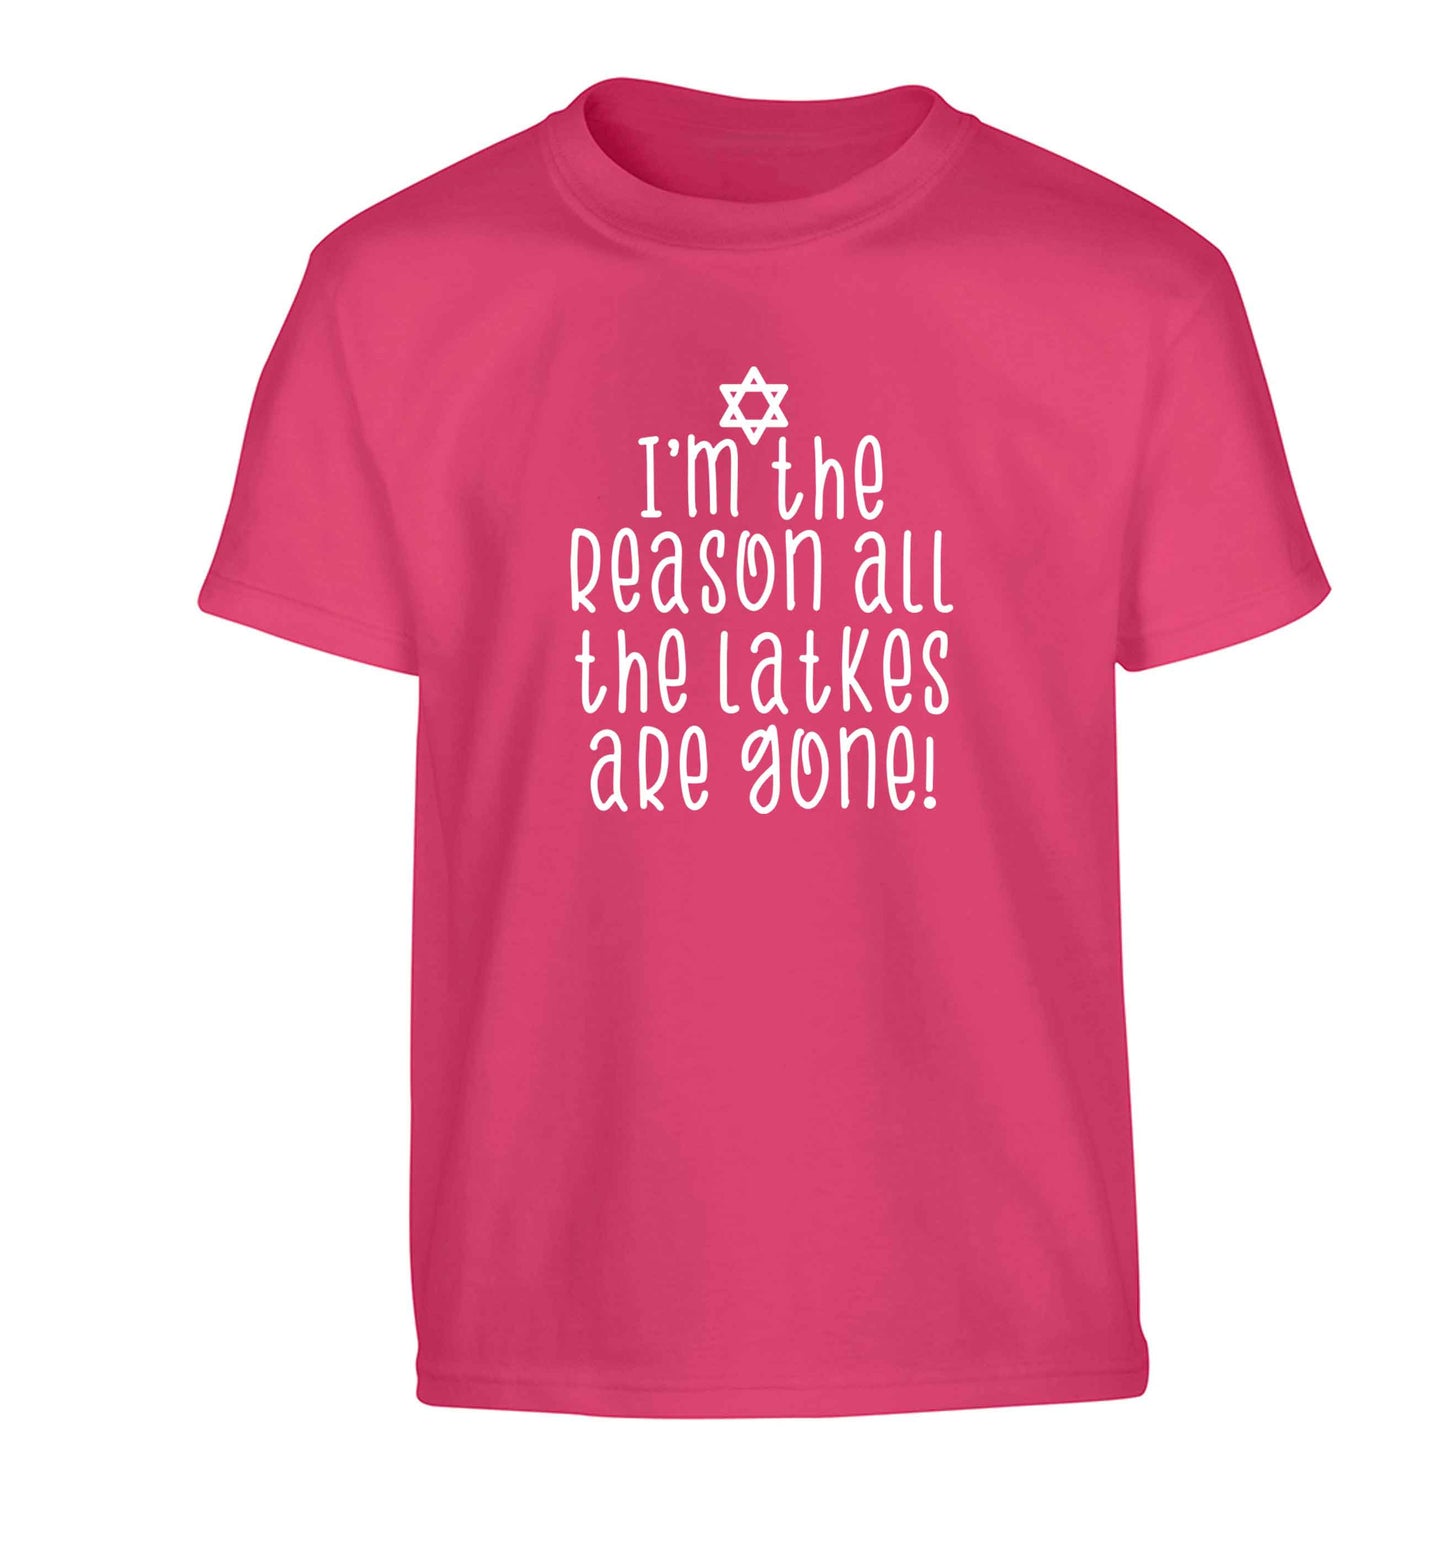 I'm the reason all the latkes are gone Children's pink Tshirt 12-13 Years